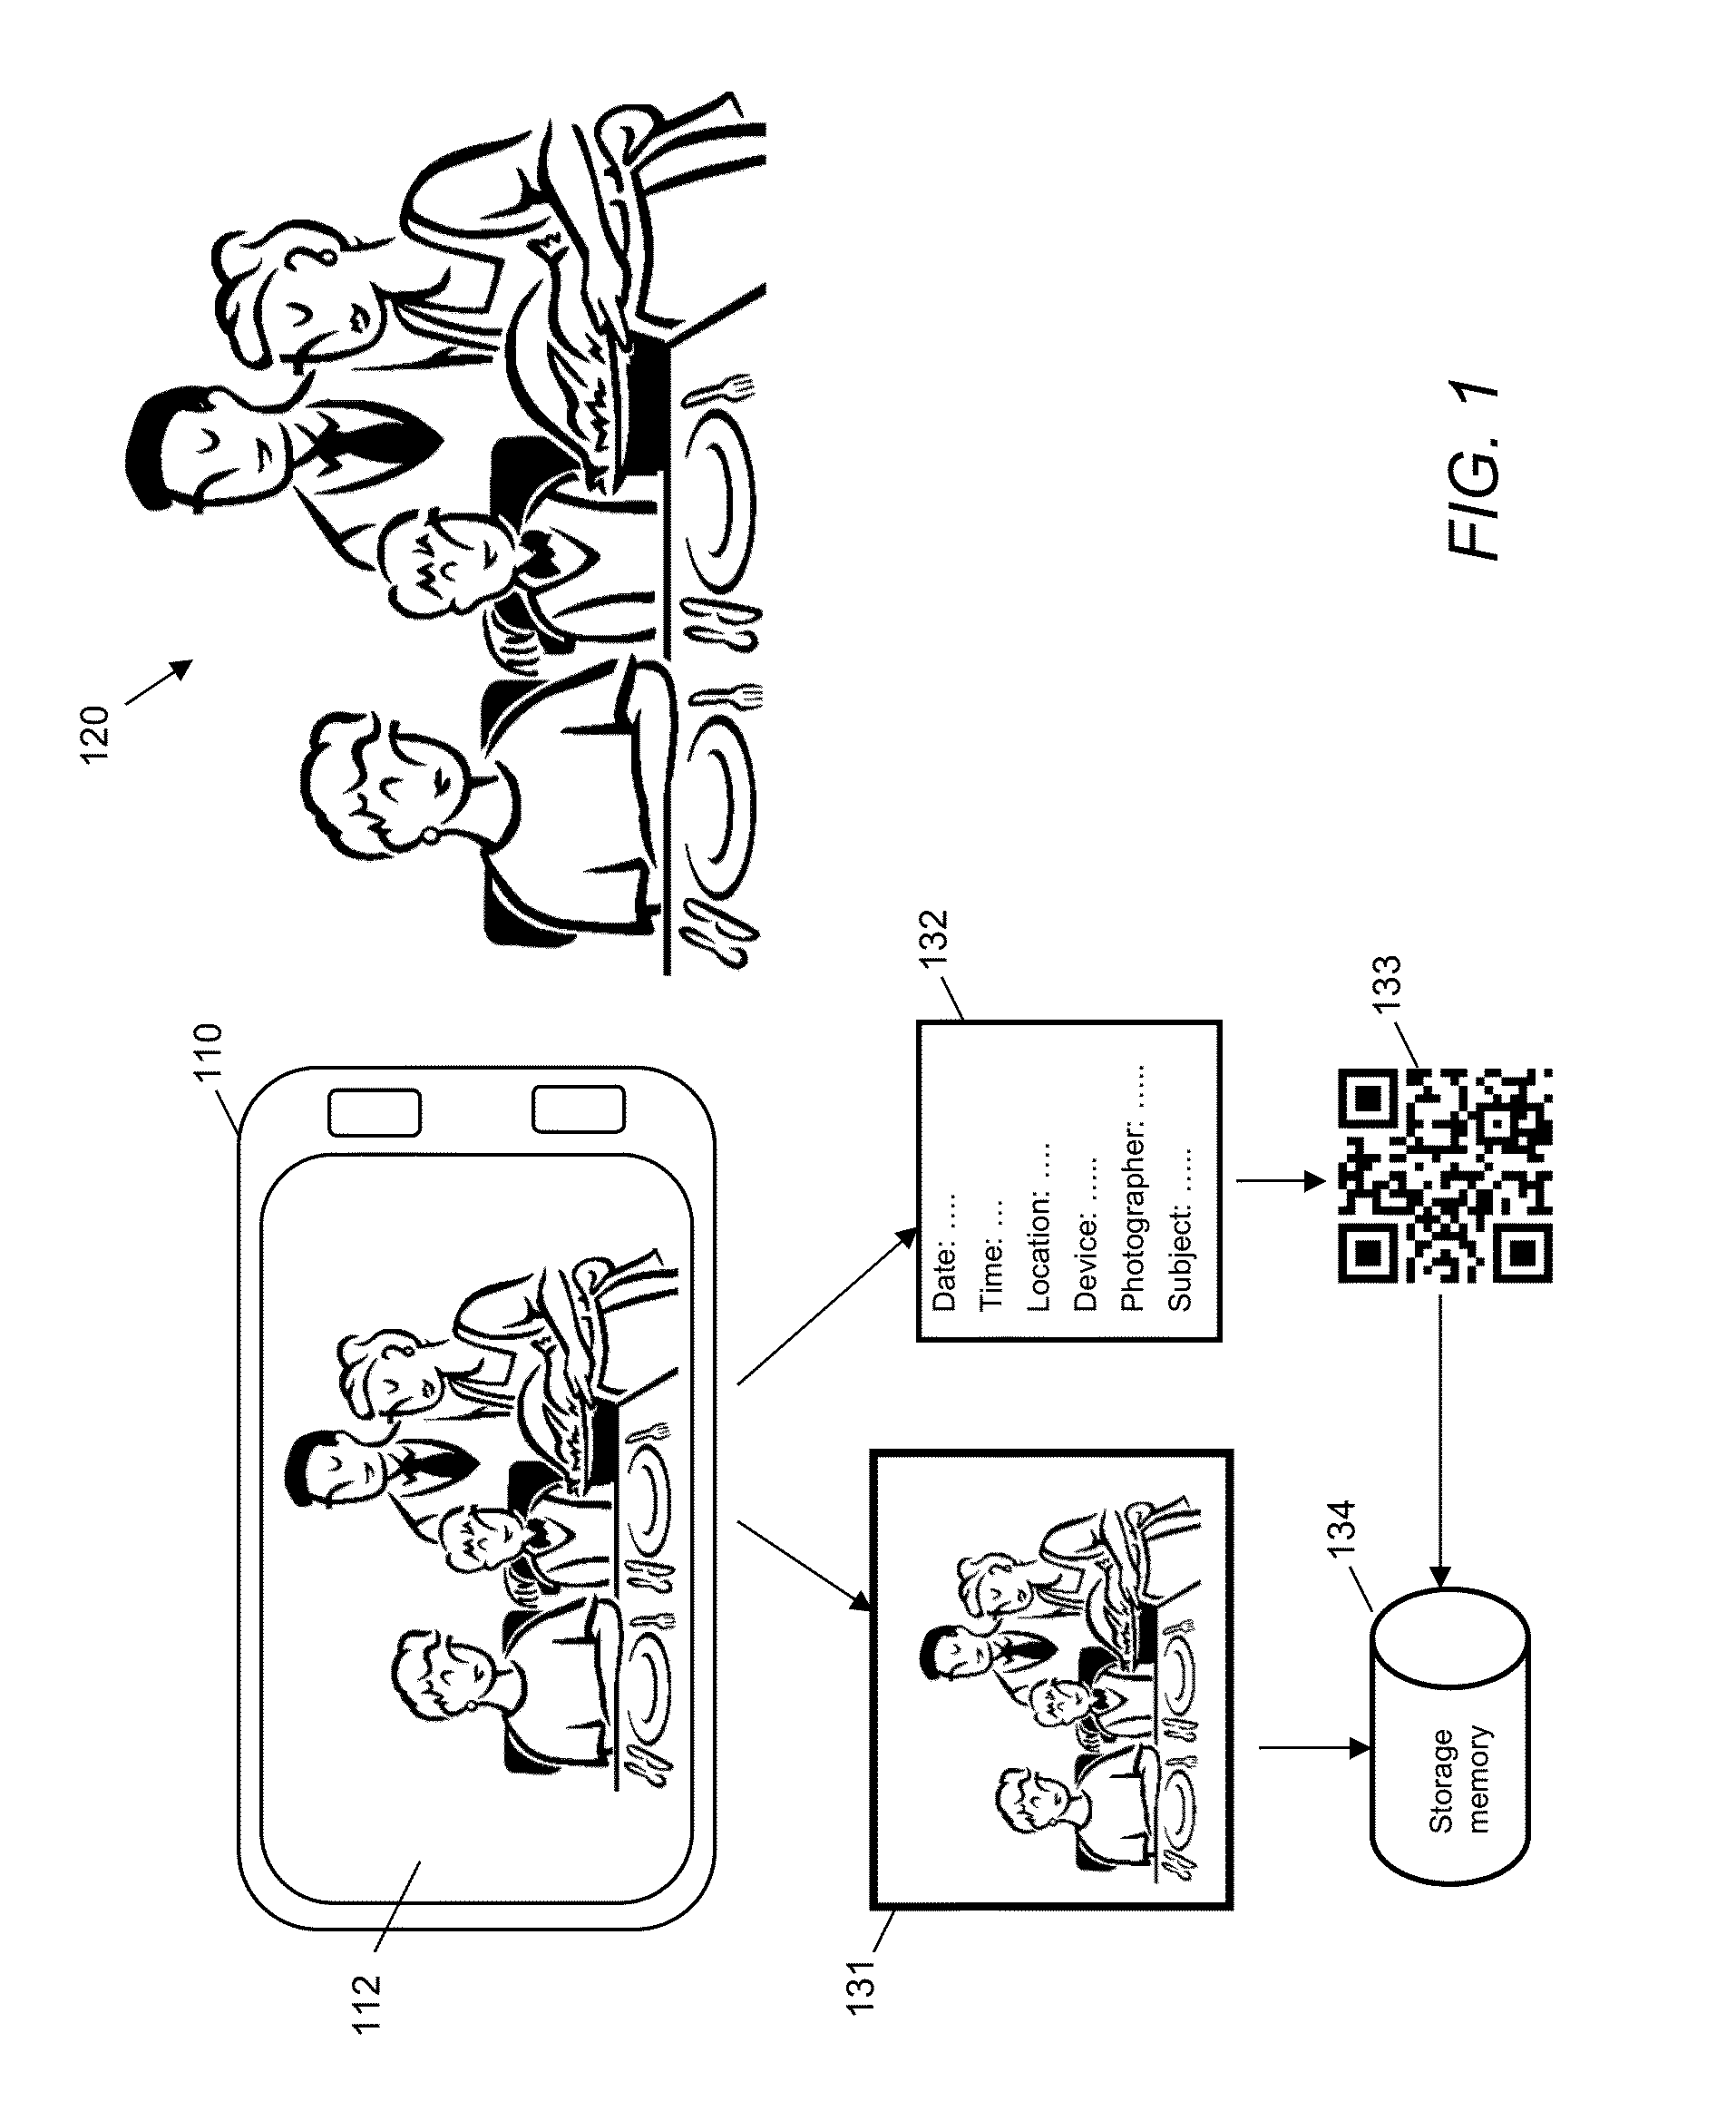 Apparatus and method for automatically generating an optically machine readable code for a captured image